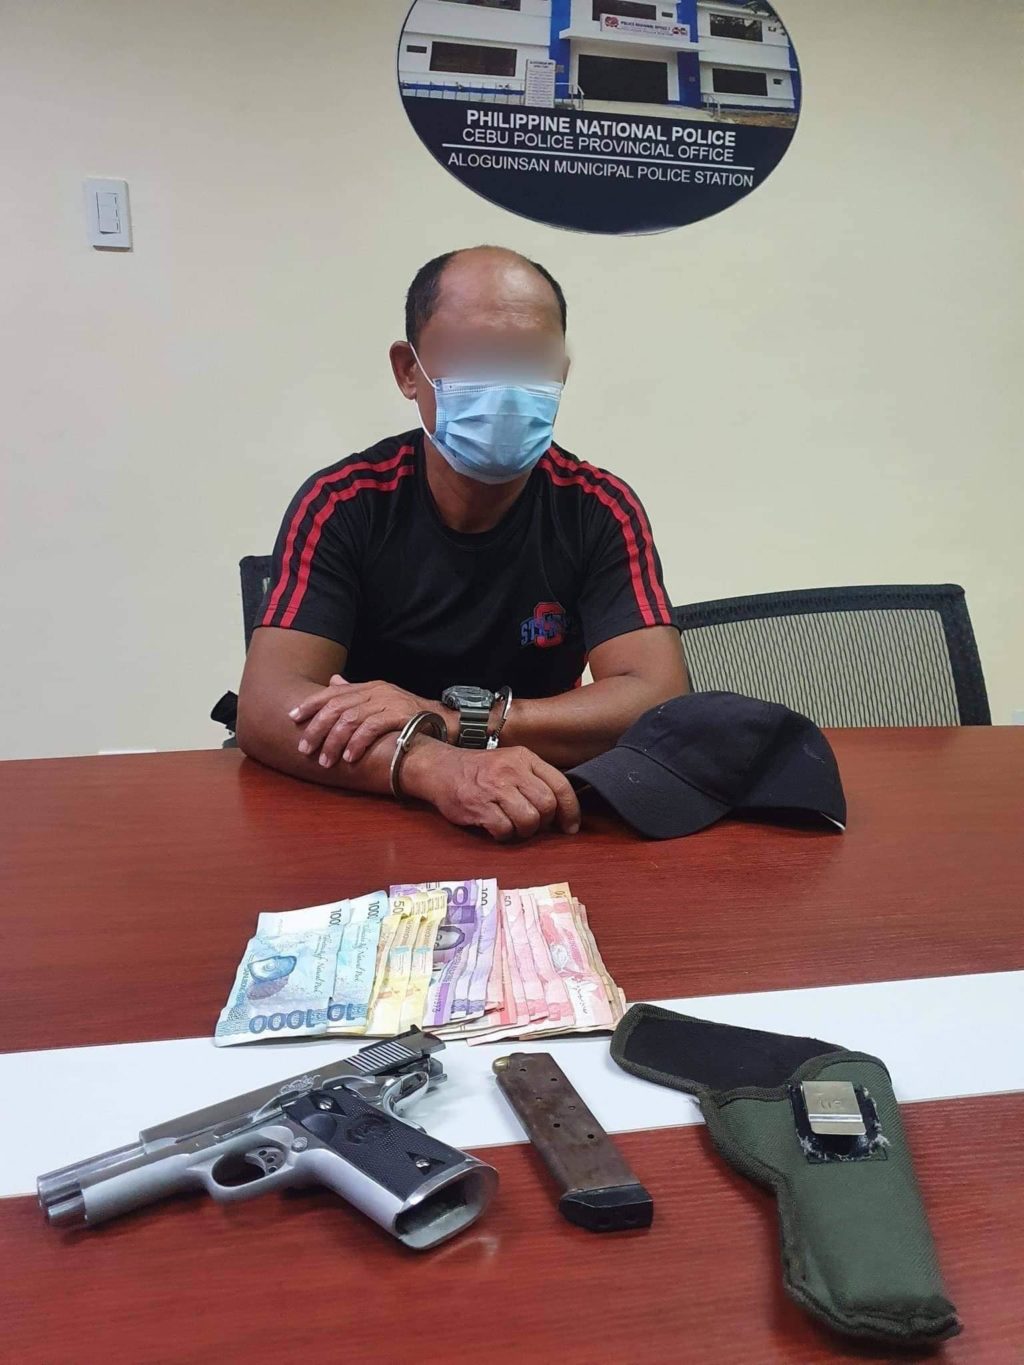 Robbery suspect Reynante Sarquilla for story:Security guard jailed for robbing gas station in Aloguinsan, Cebu